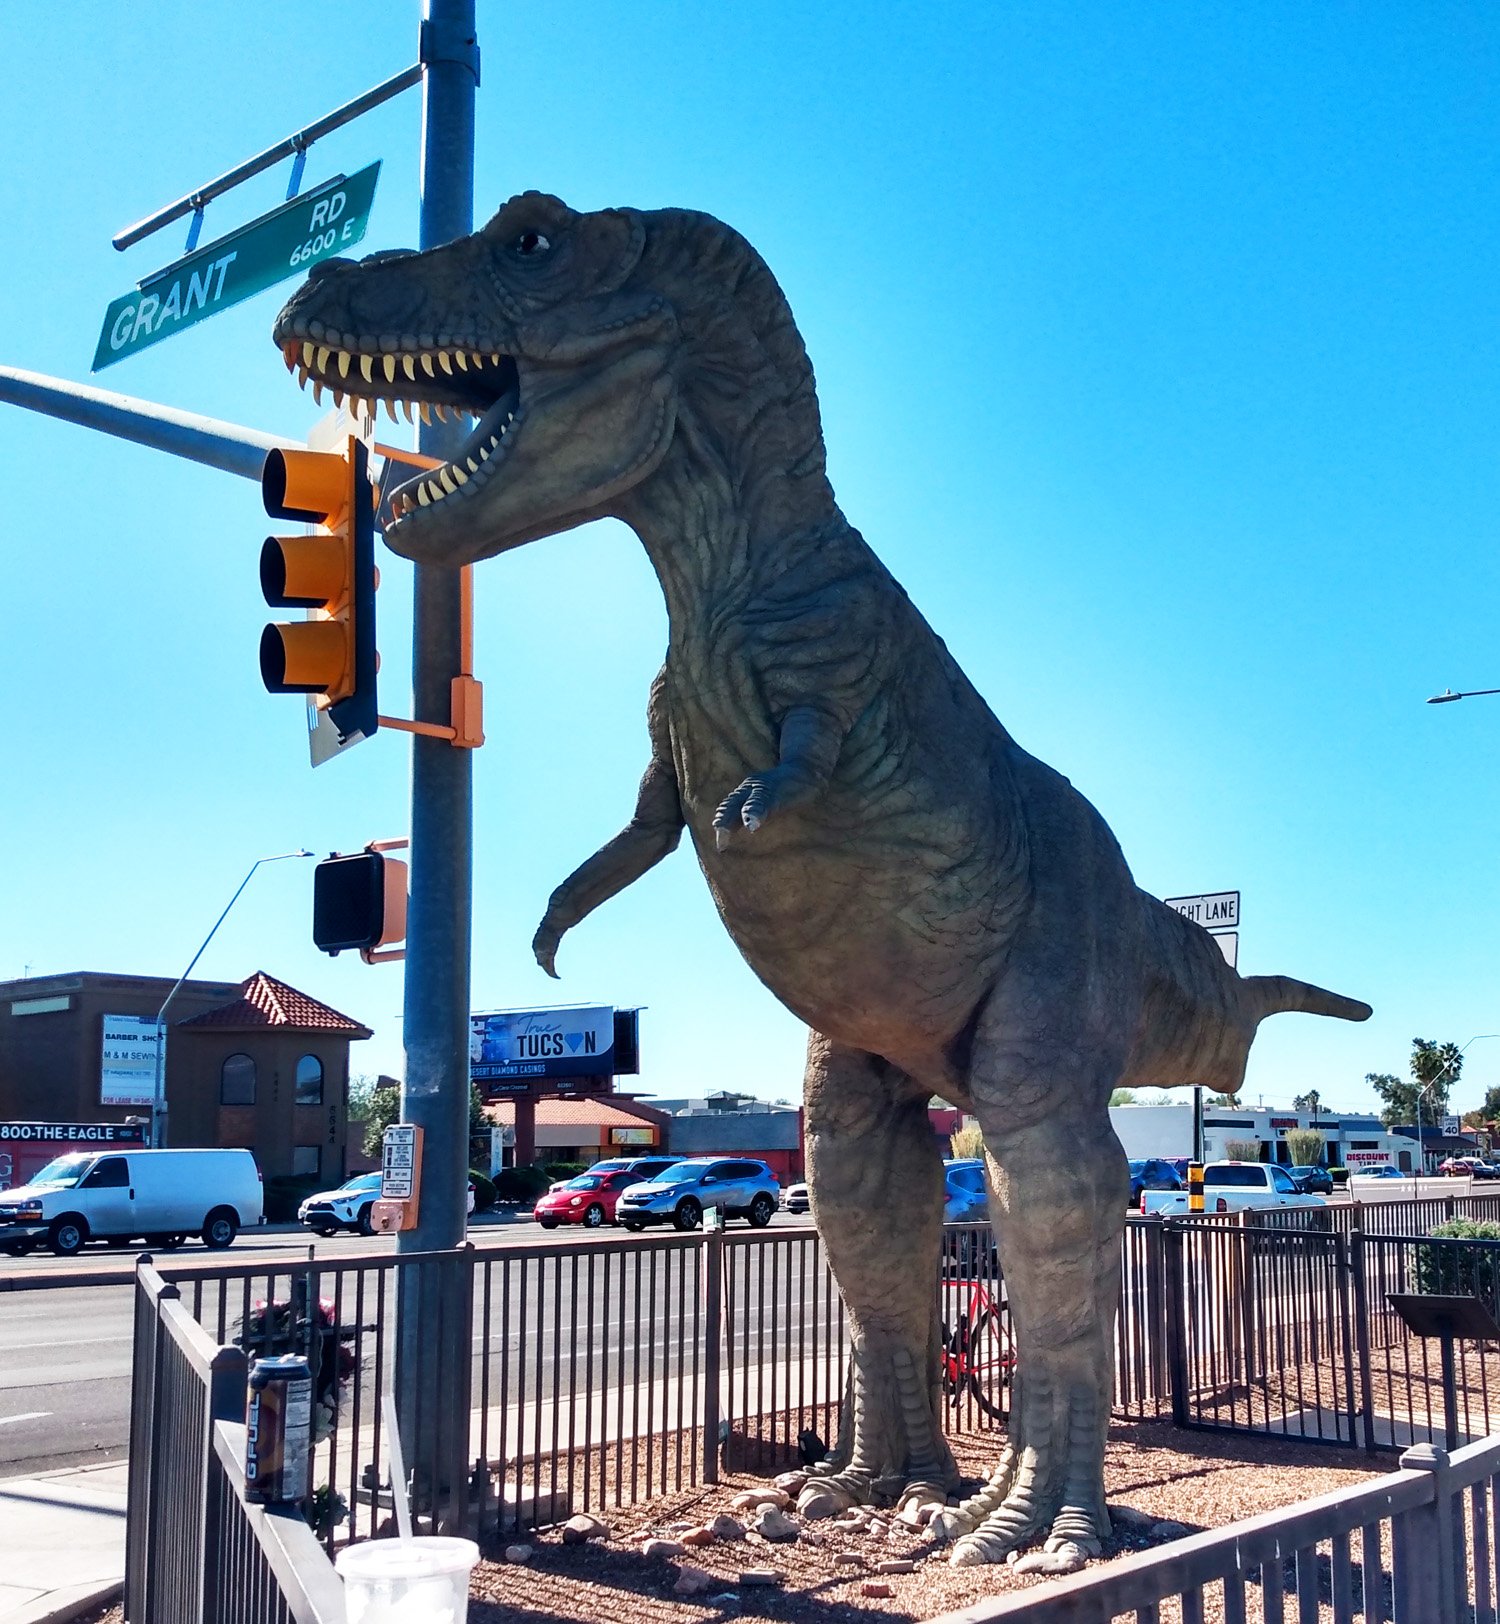 On the way you pass by this huge T-Rex statue some creationists wanted taken down ( lol ).